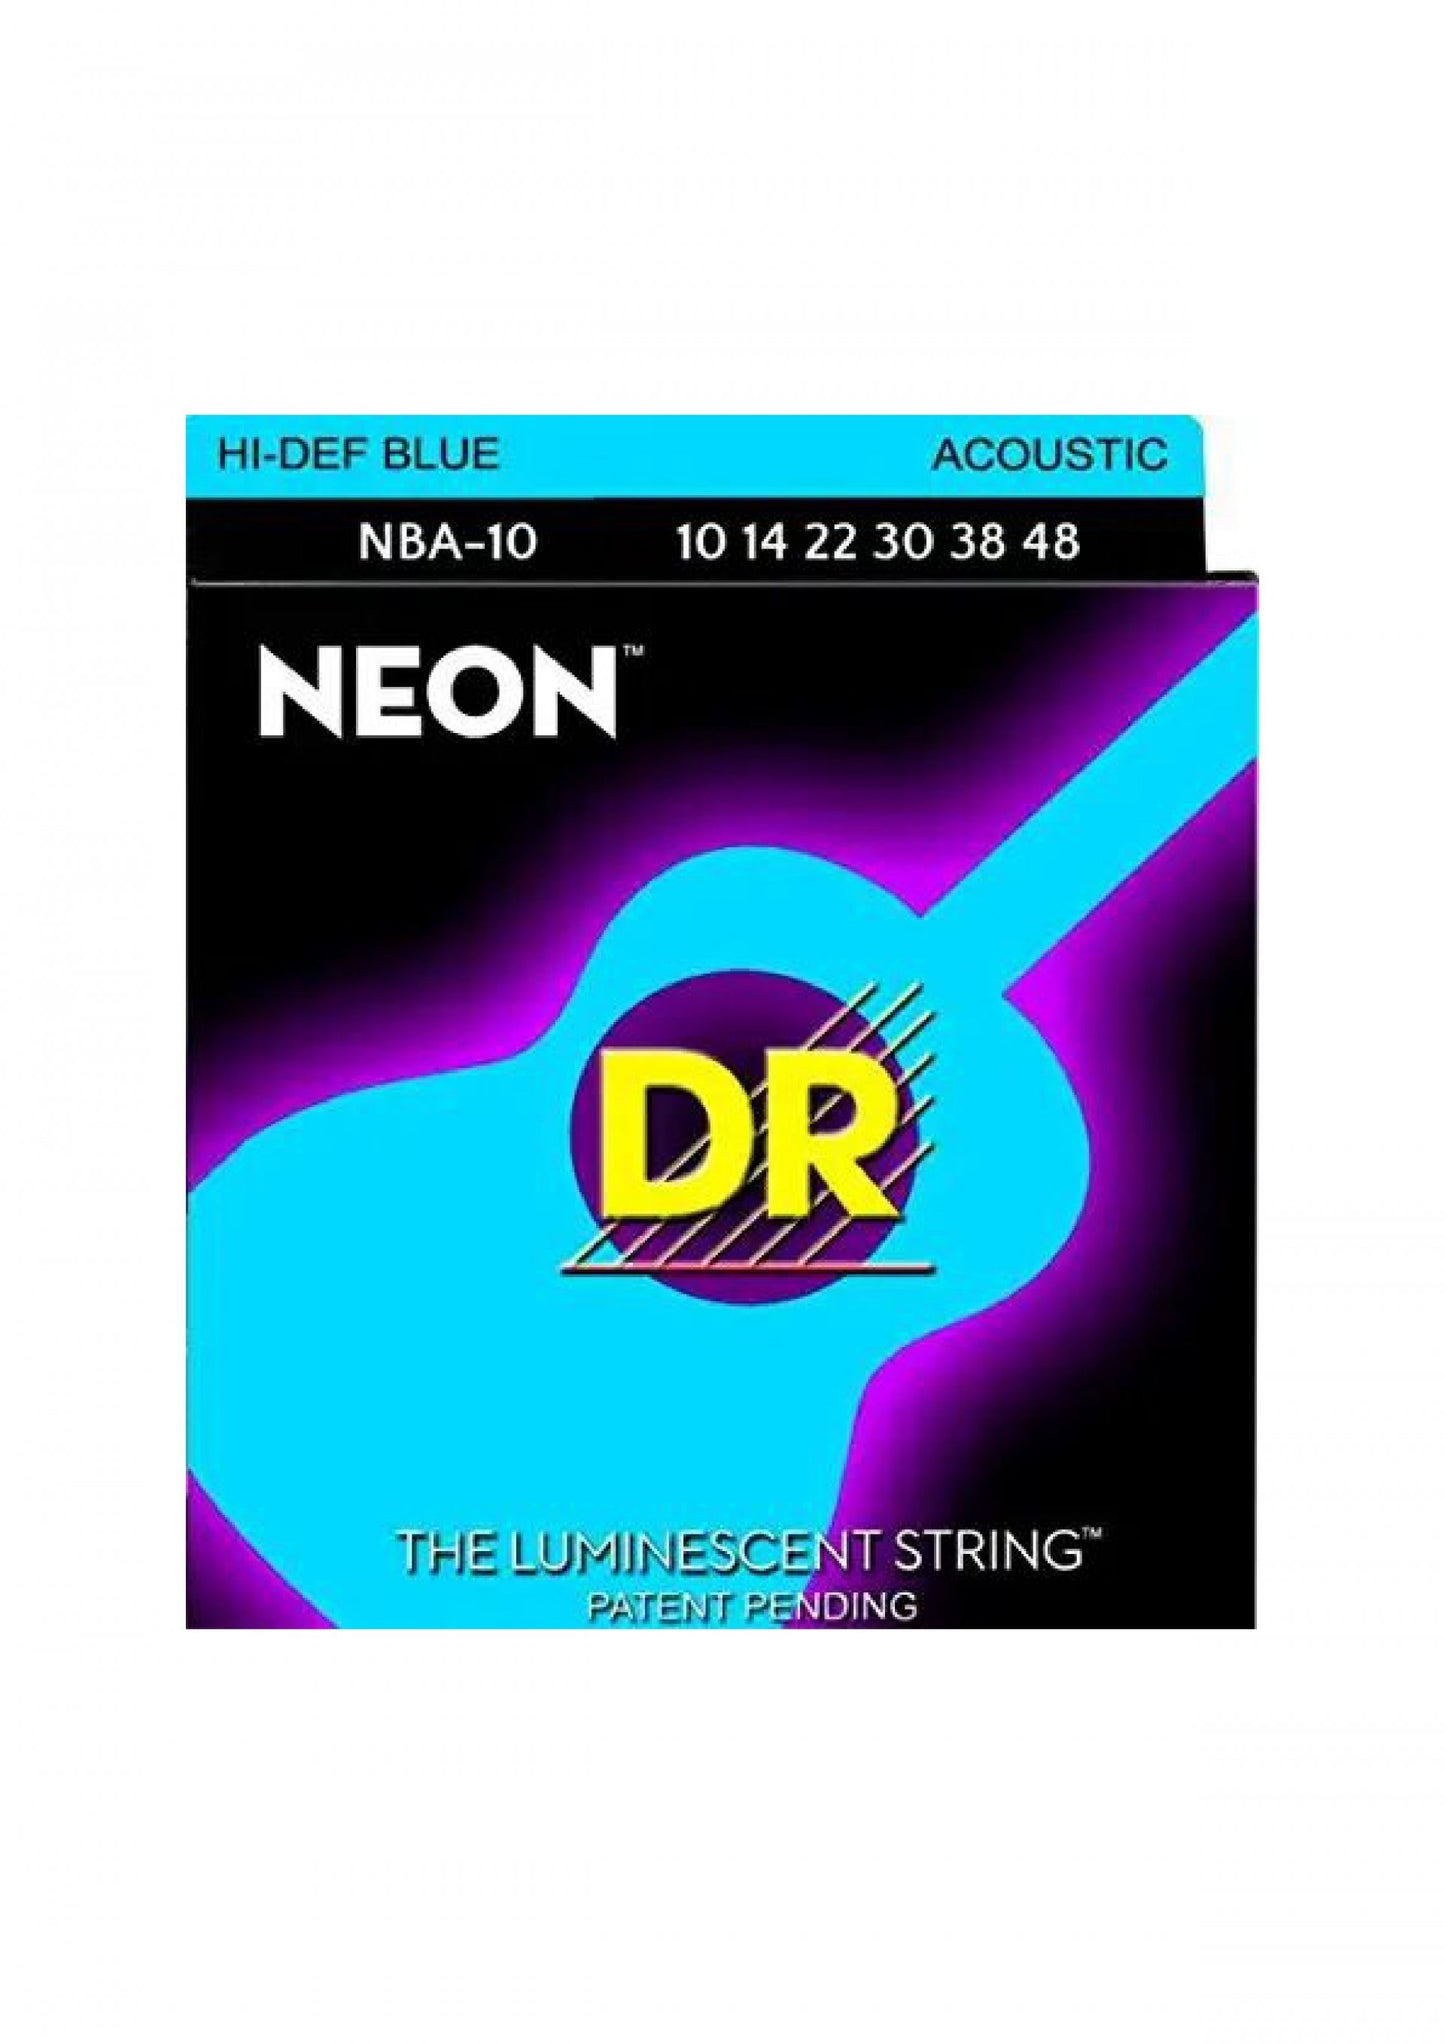 DR Strings NBA-10 HI-DEF NEON Blue Colored Acoustic Guitar Strings 10-48, Extra Light